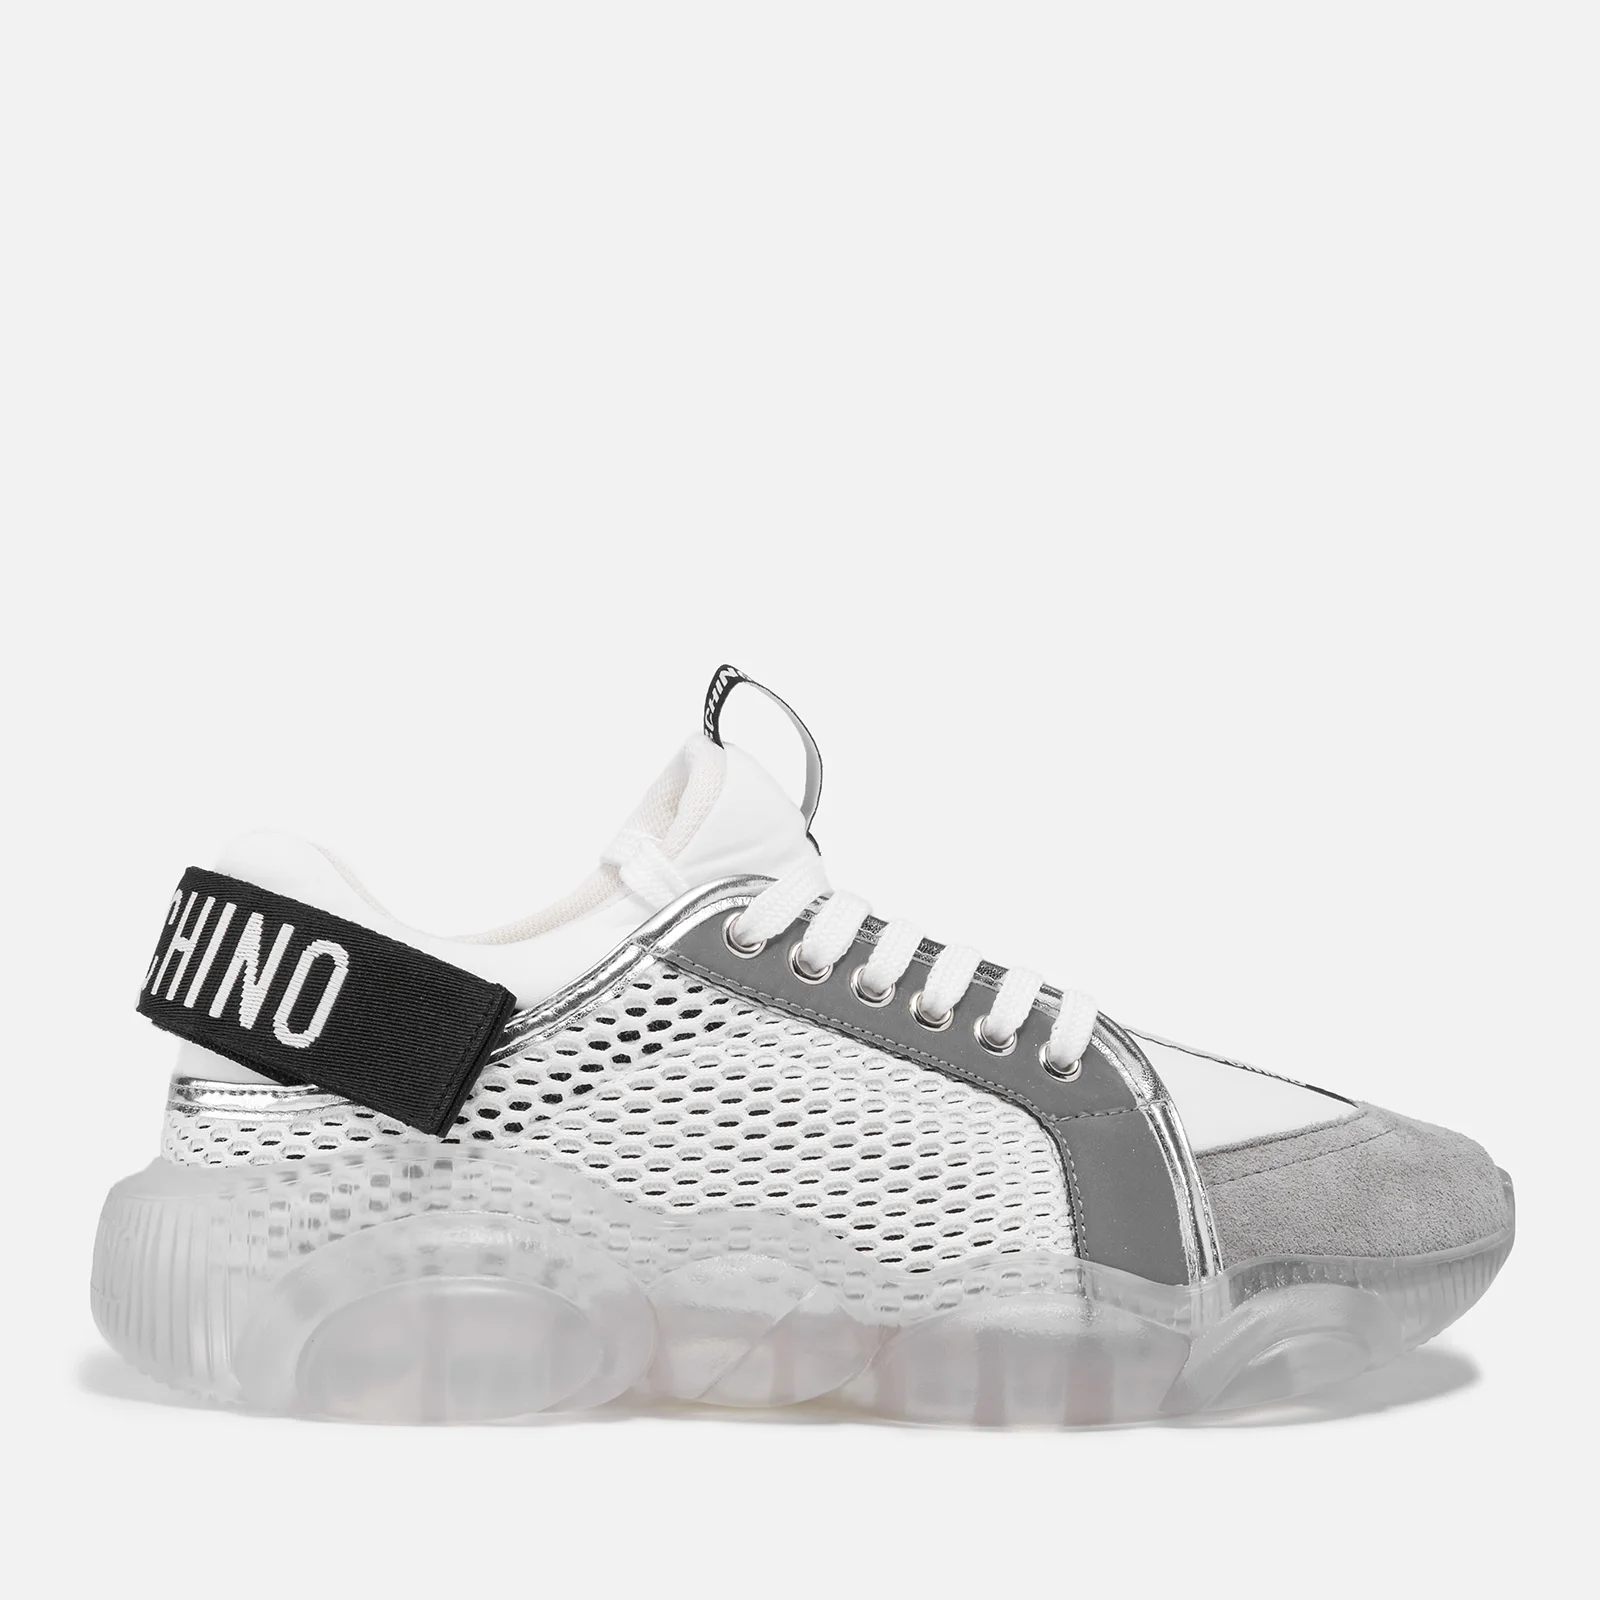 Moschino Women's Lace Up Logo Sneakers - White/Grey Image 1